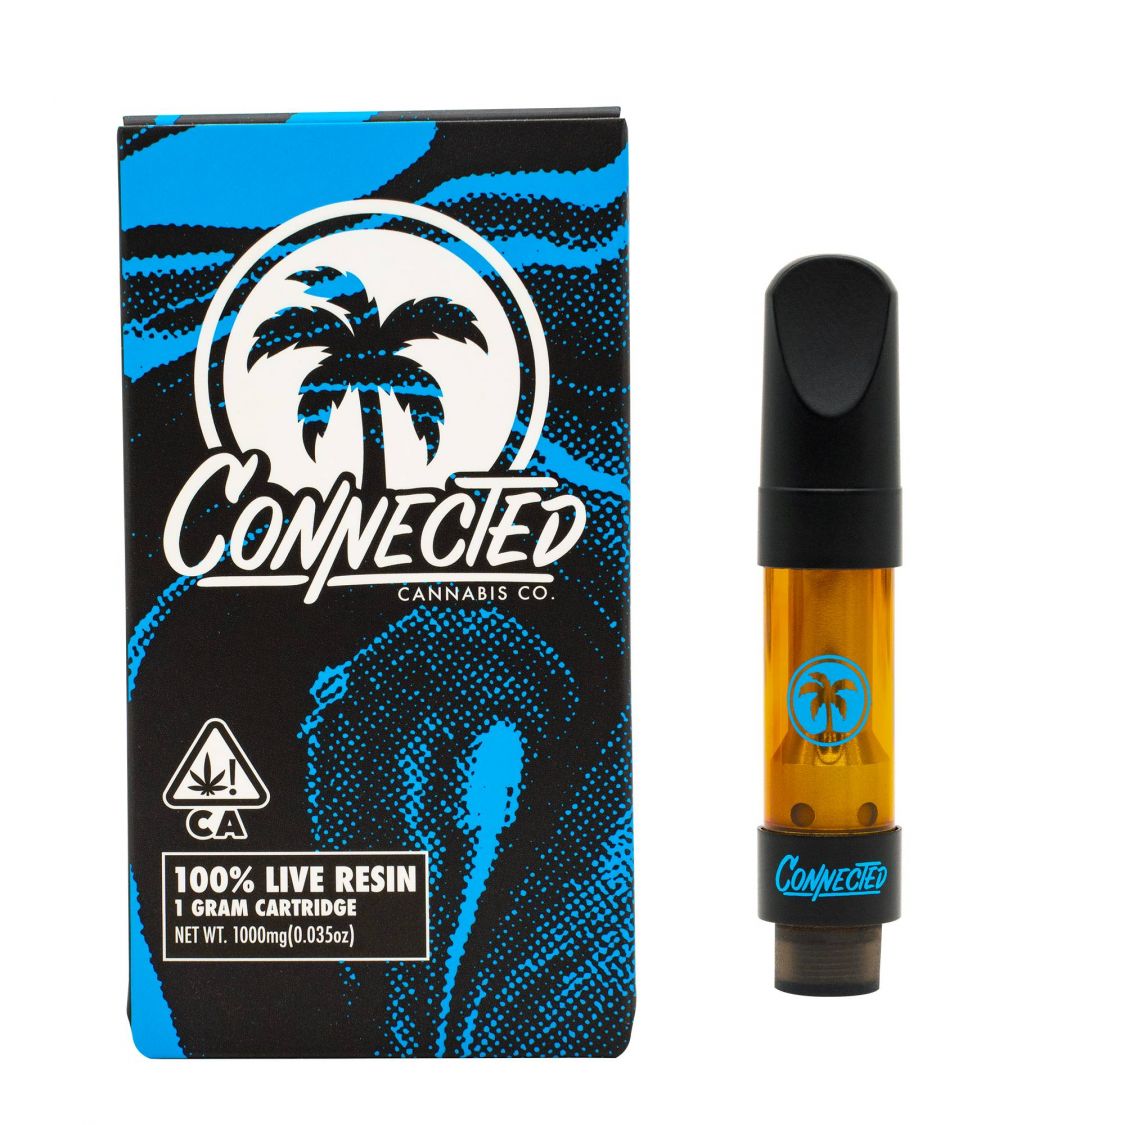 Connected Guava 2.0 Live Resin Cartridge Cartridges 510 Thread